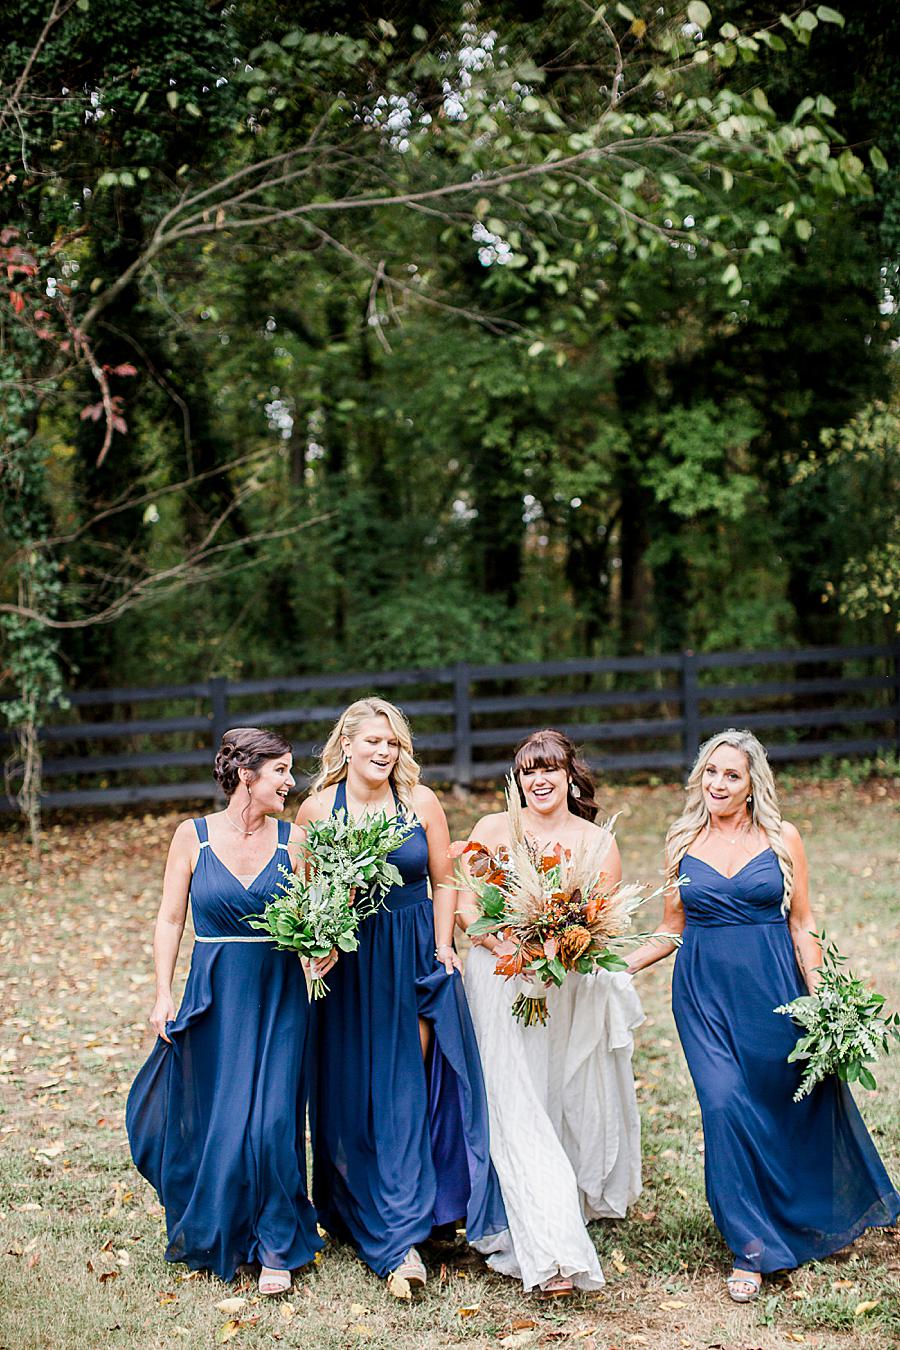 Bridesmaids at this RiverView Family Farm wedding by Knoxville Wedding Photographer, Amanda May Photos.